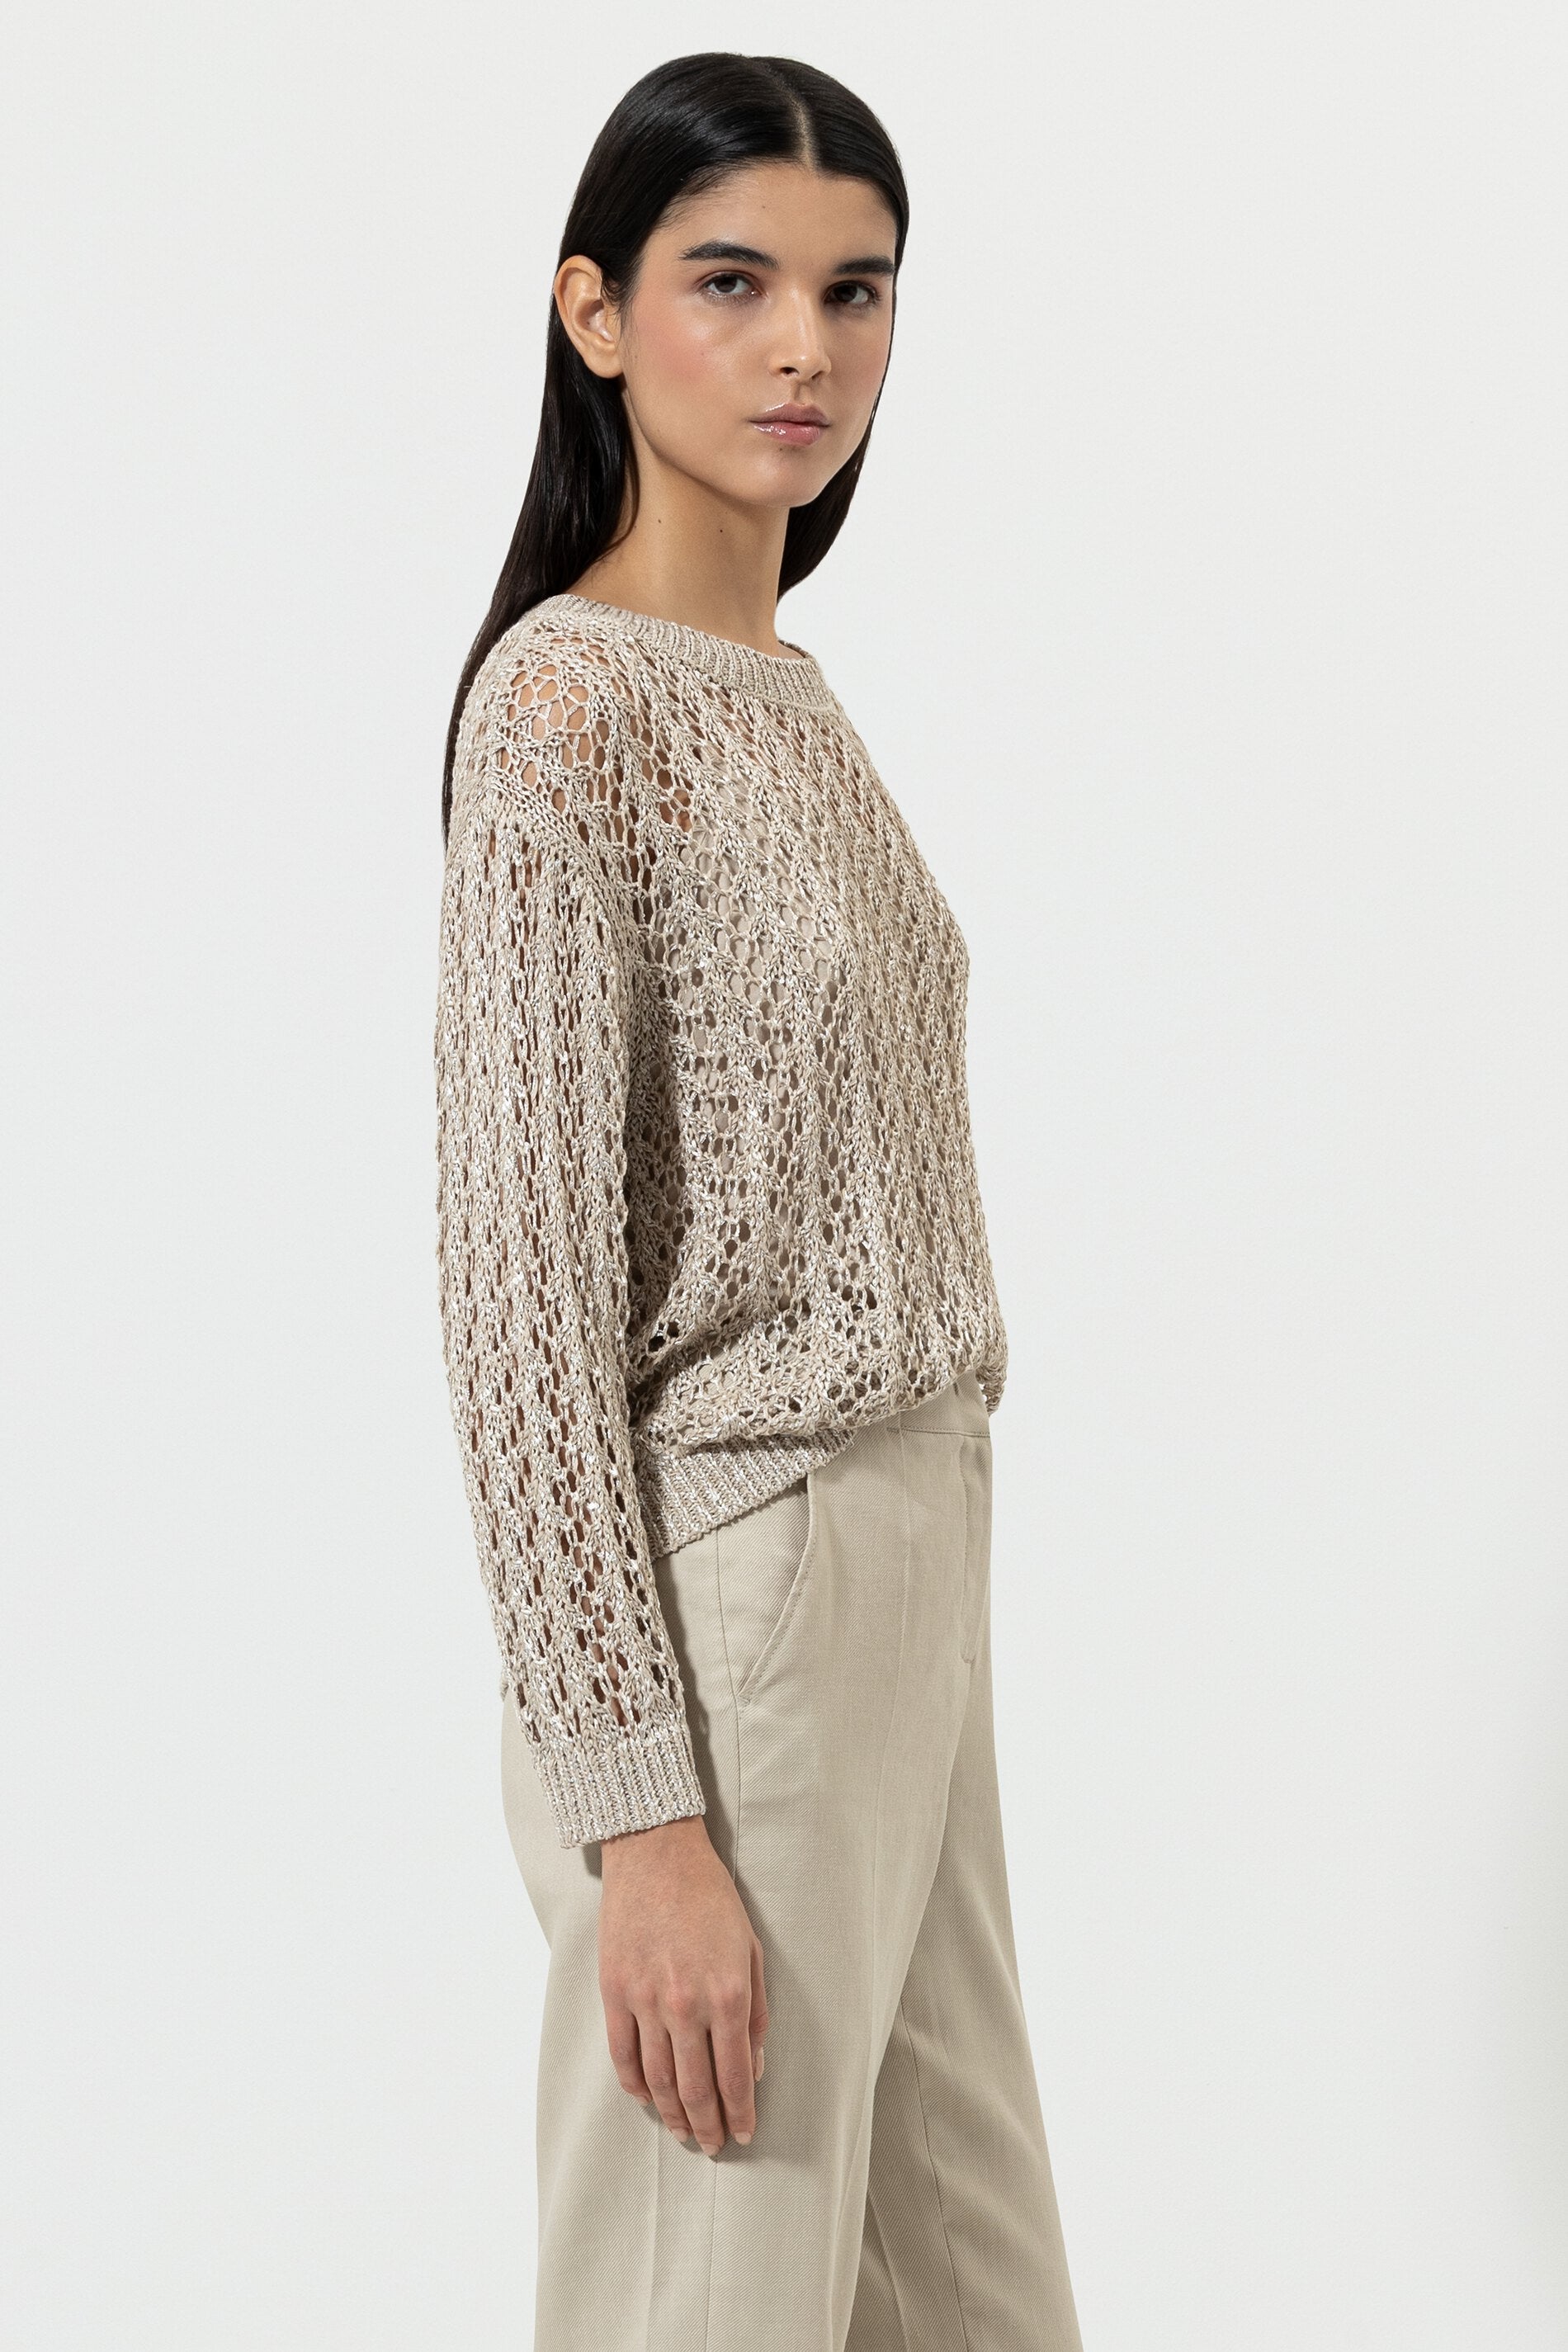 LUISA-CERANO-OUTLET-SALE-Pullover-in-Ajour-Muster-Strick-ARCHIVE-COLLECTION-3_bc373c52-ccdd-4509-bf34-df42f2063155.jpg